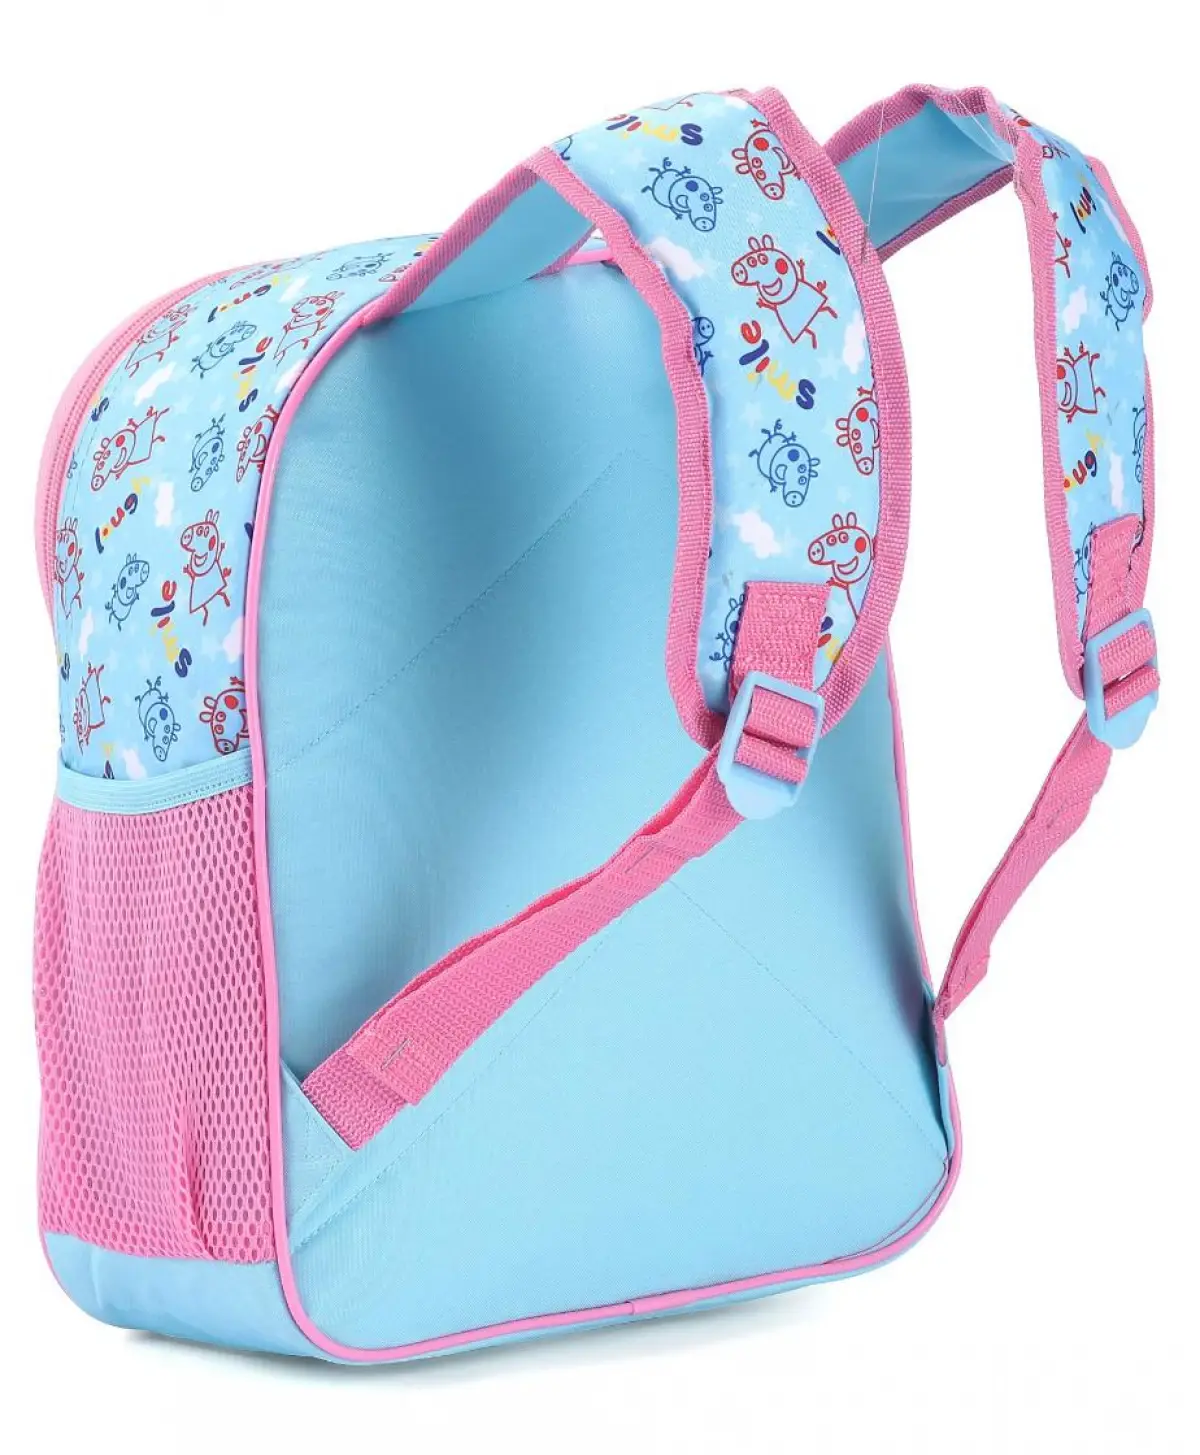 Striders 13 inches Peppa Pig-Inspired School Bag for Little Explorers Multicolor For Kids Ages 2Y+